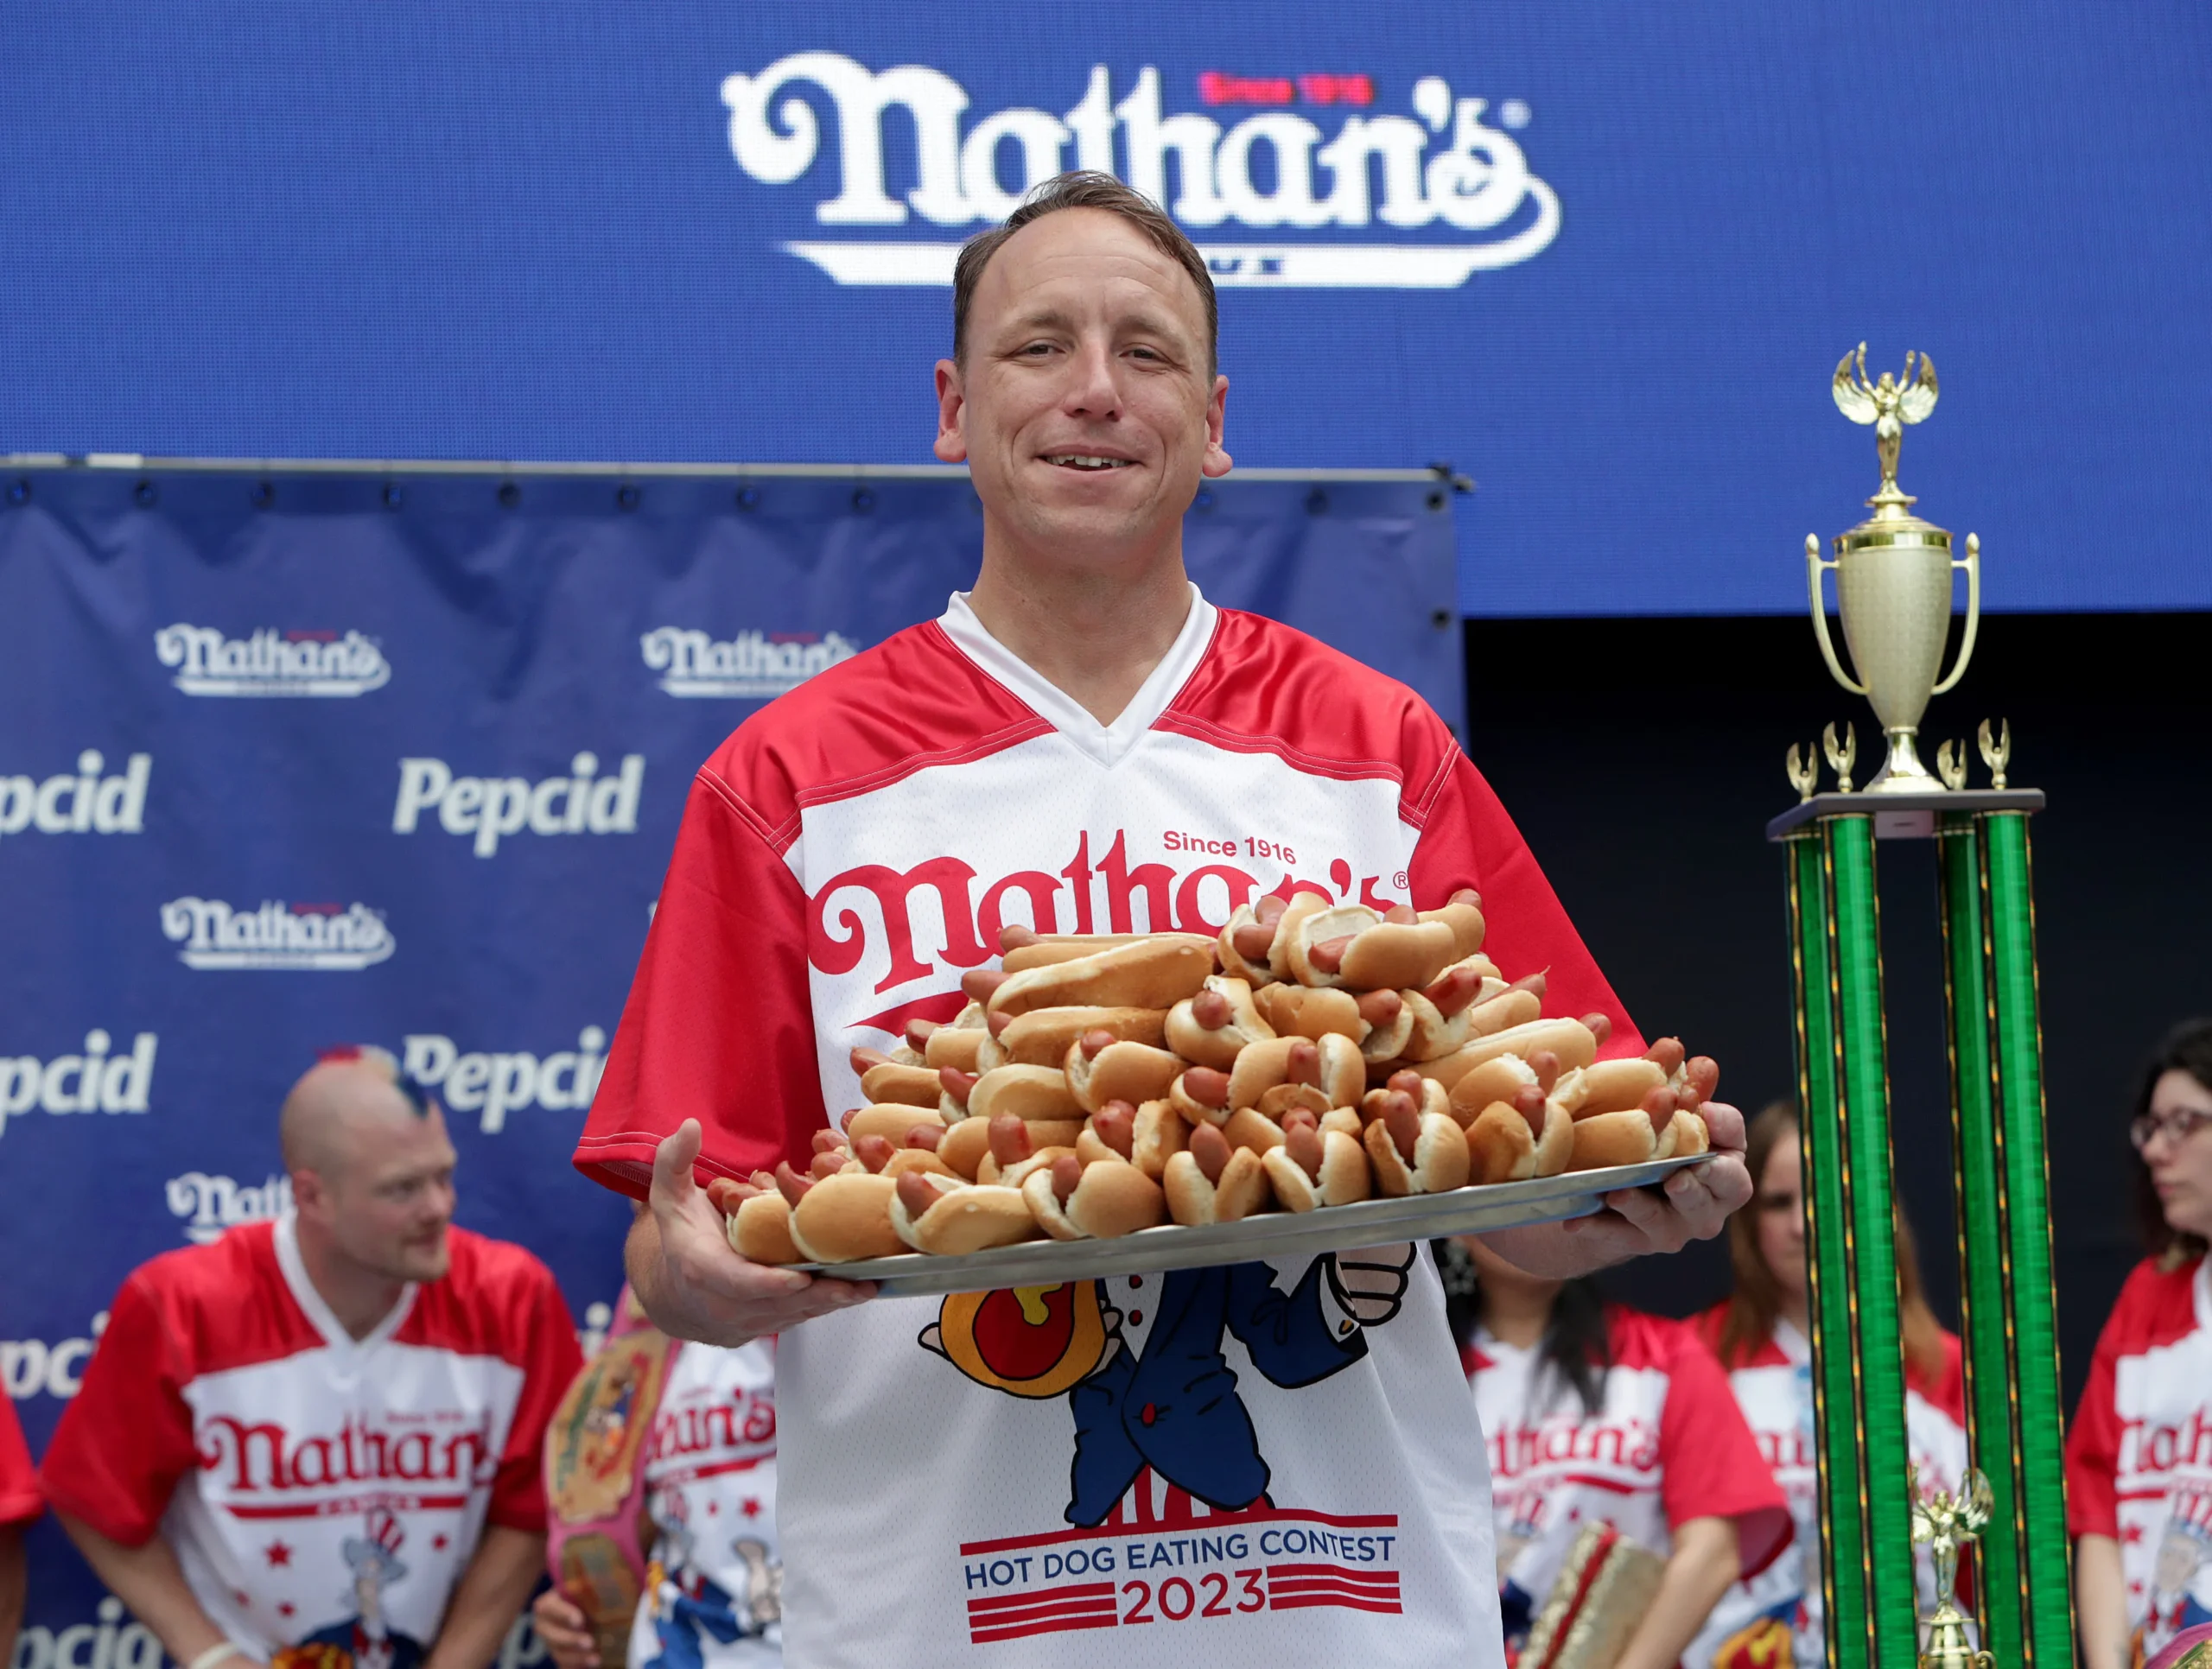 SPL8698752 021 Weigh In Ceremony for the Nathans Famous 4th of July hot dog eating contest in New Y scaled